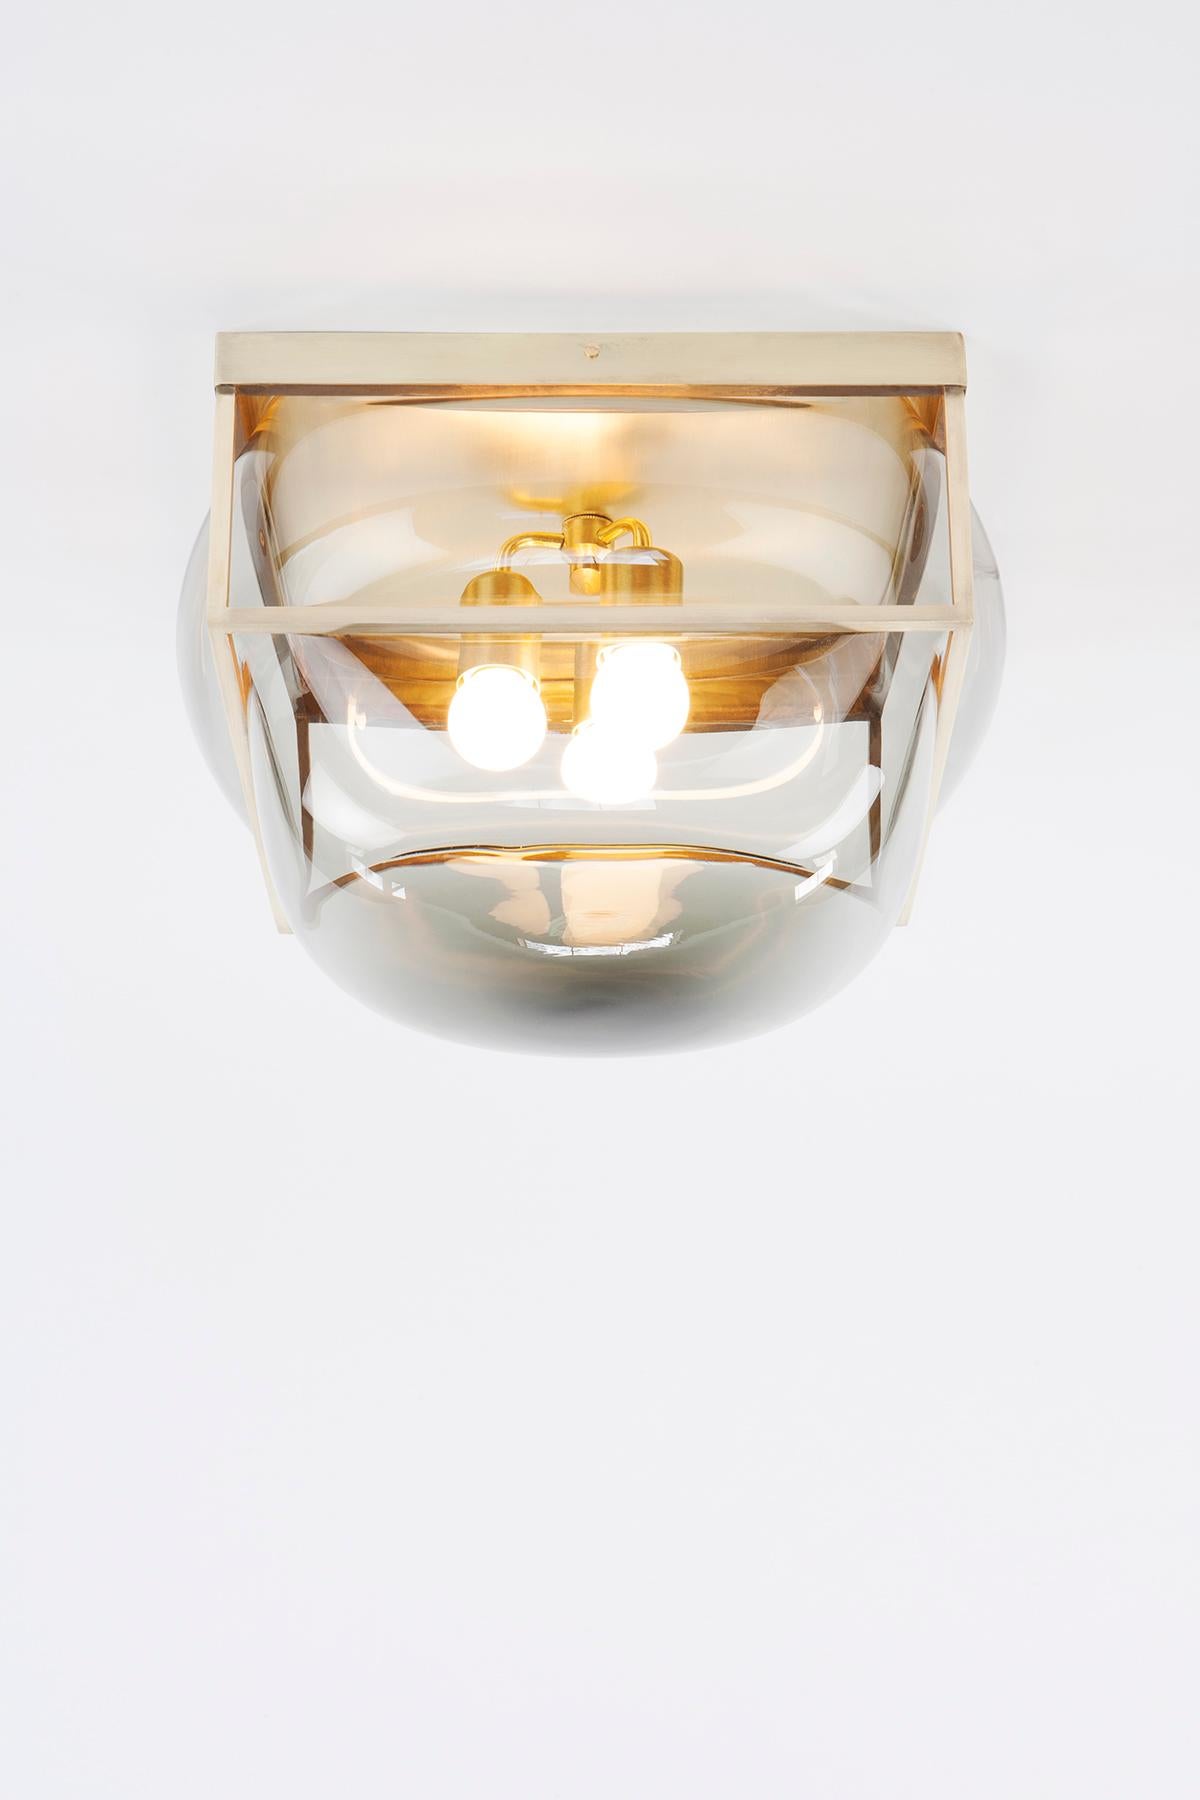 Art Deco XL Bulle Light with Handblown Glass Solid Brass as Sconce, Flush, or Table Lamp For Sale